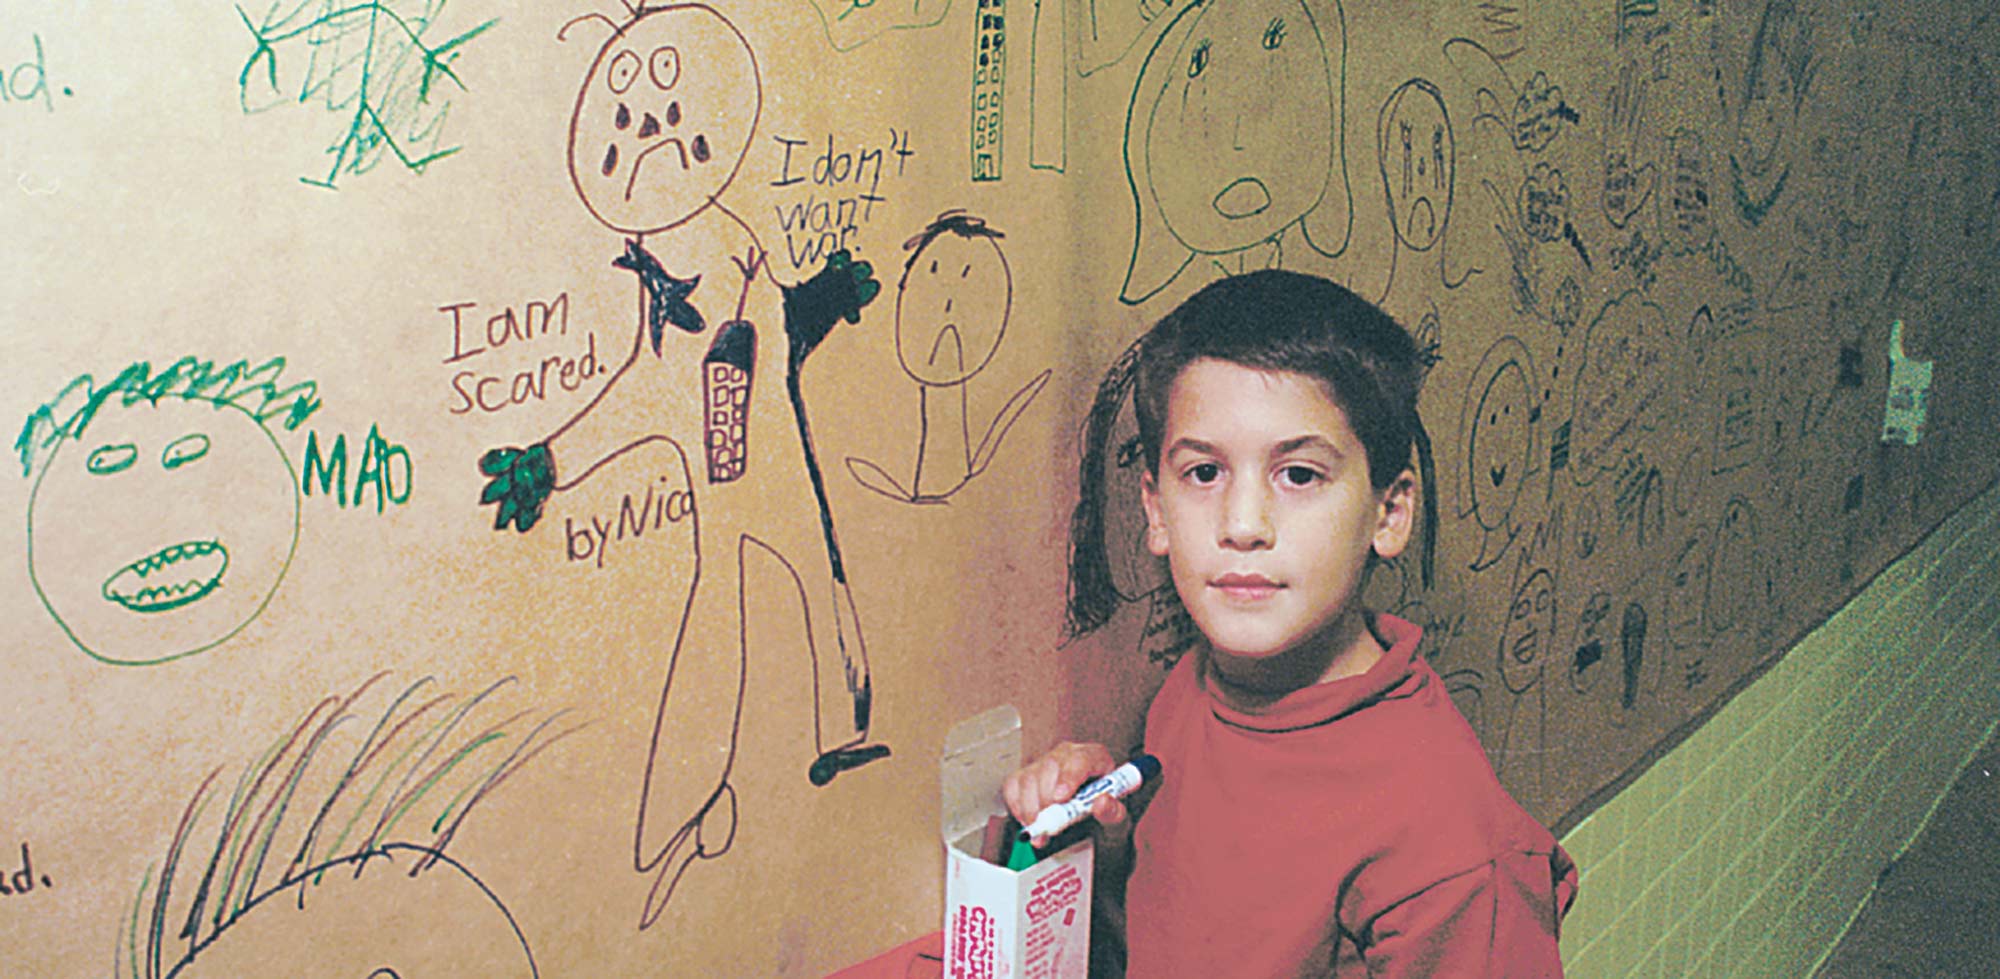 A boy drawing on the wall